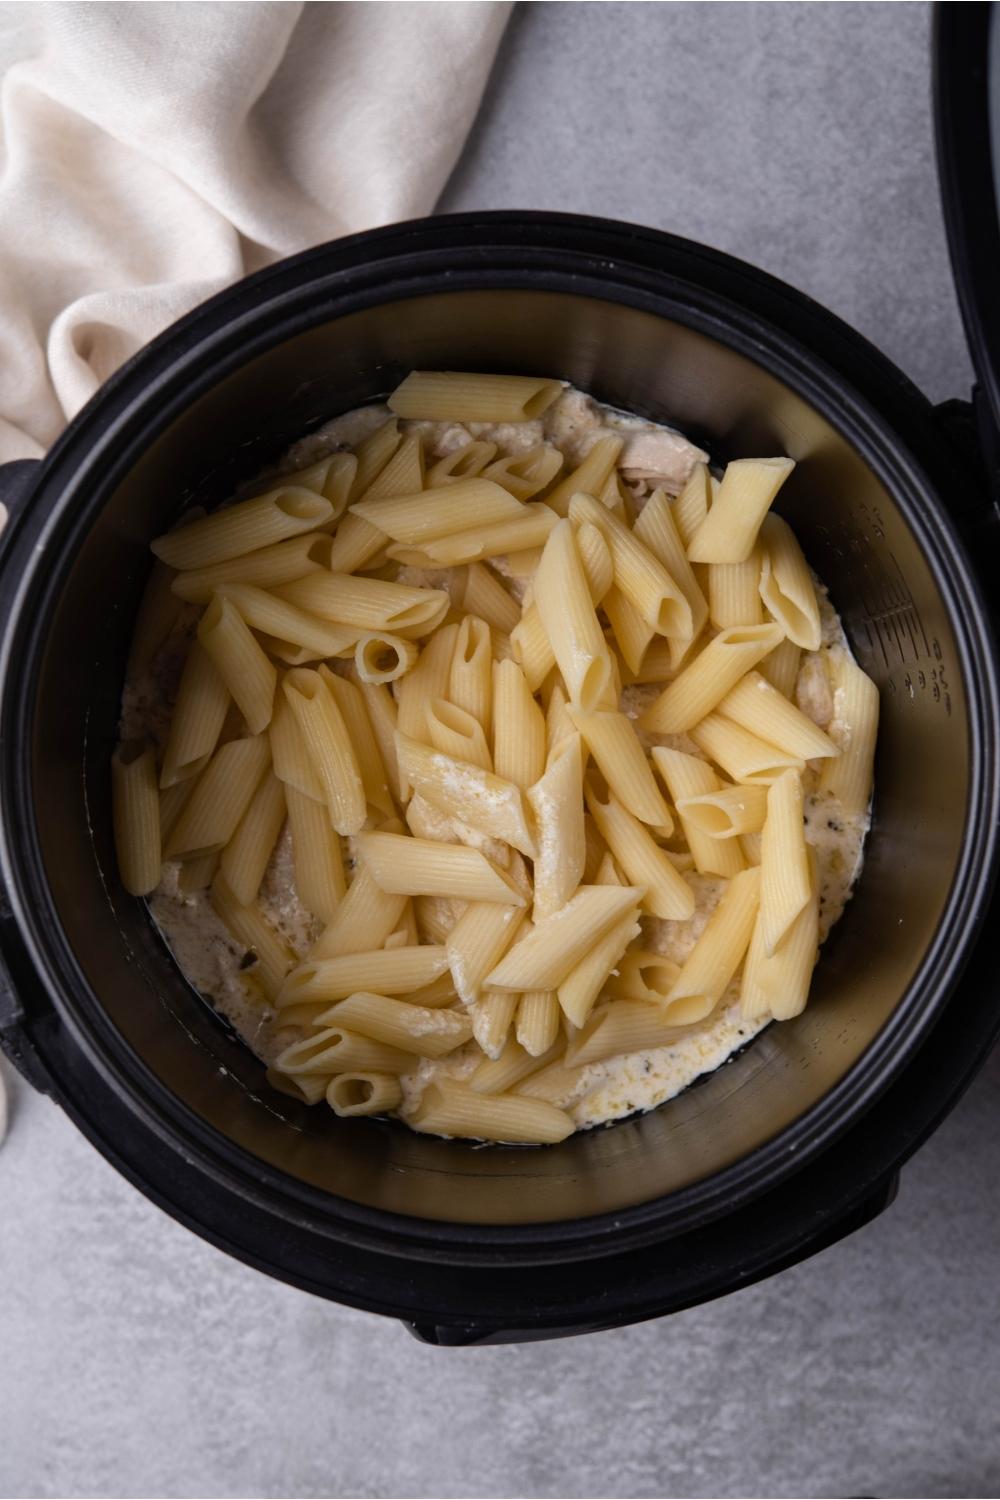 A black slow cooker with shredded chicken, creamy Italian dressing, and freshly added cooked pasta in the slow cooker. The slow cooker is on a grey counter with a partial view of a white kitchen towel.